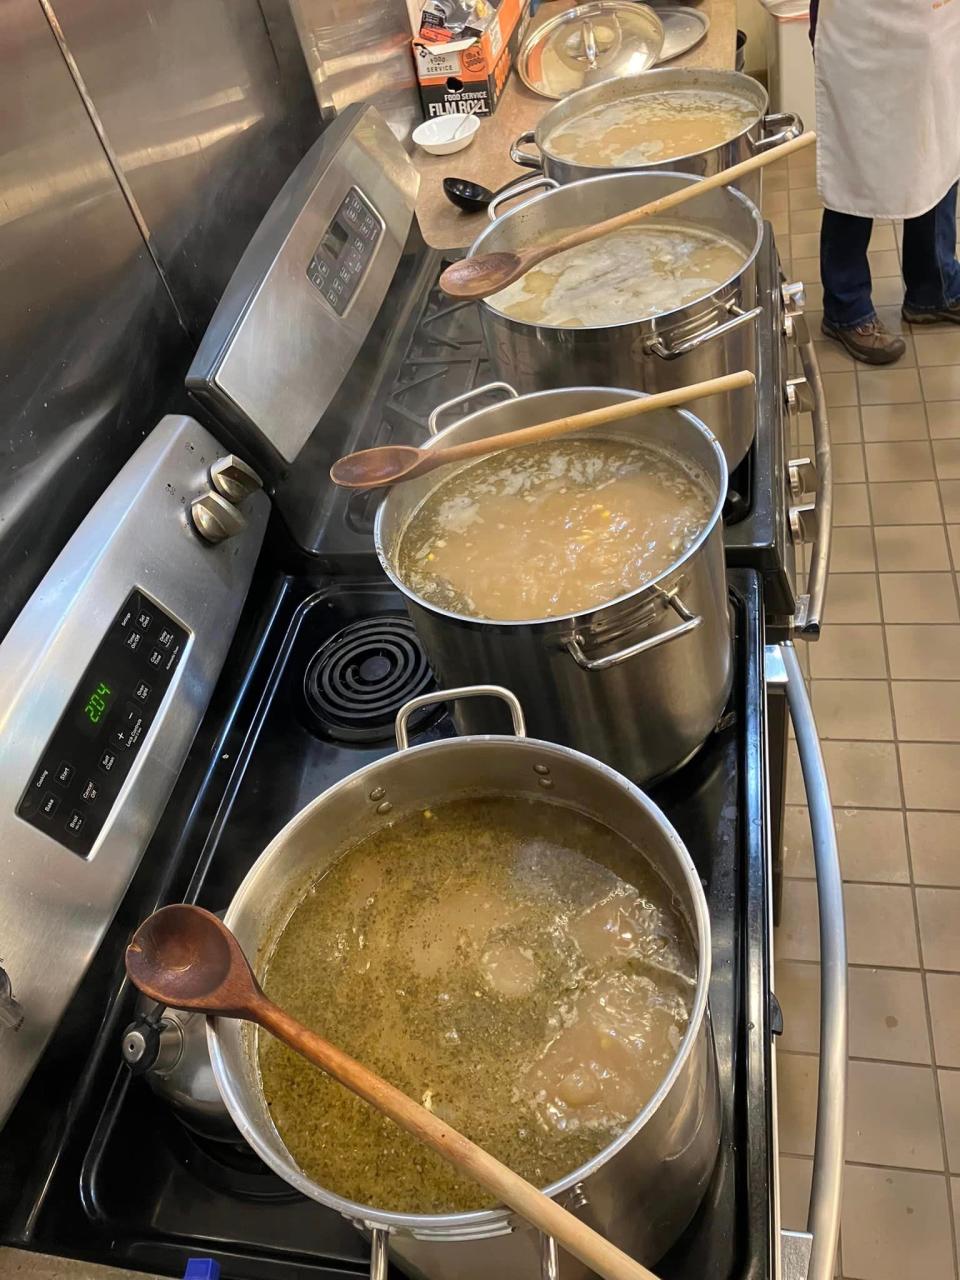 Soup is cooking on the stove for the free monthly meal at Oak Ridge Unitarian Universalist Church.